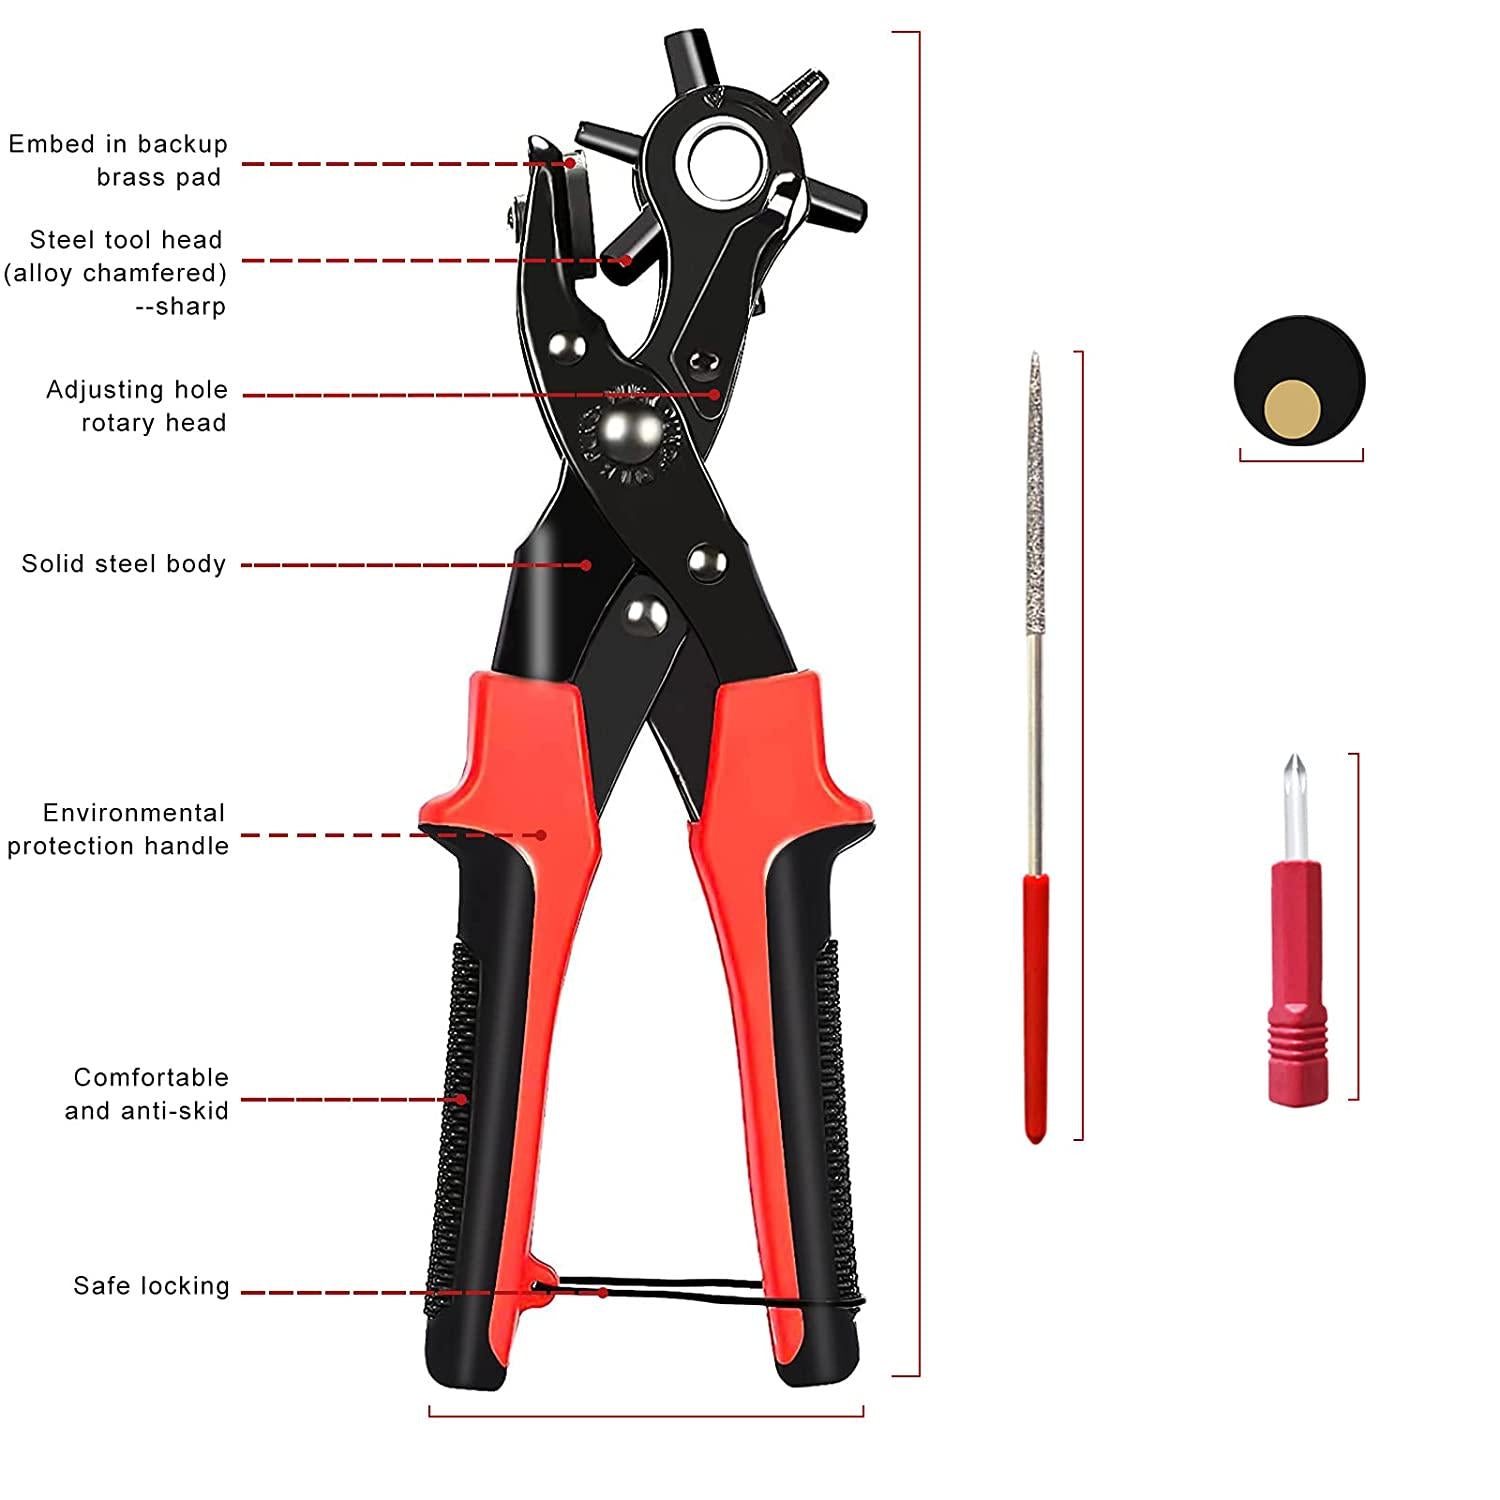 YEESON, Leather Hole Punch Belt Puncher Tool Set, YEESON Professional Revolving Plier Punch for Belts, Watch Bands, Straps, Dog Collars, Saddles, Shoes, Fabric, DIY Home or Craft Projects